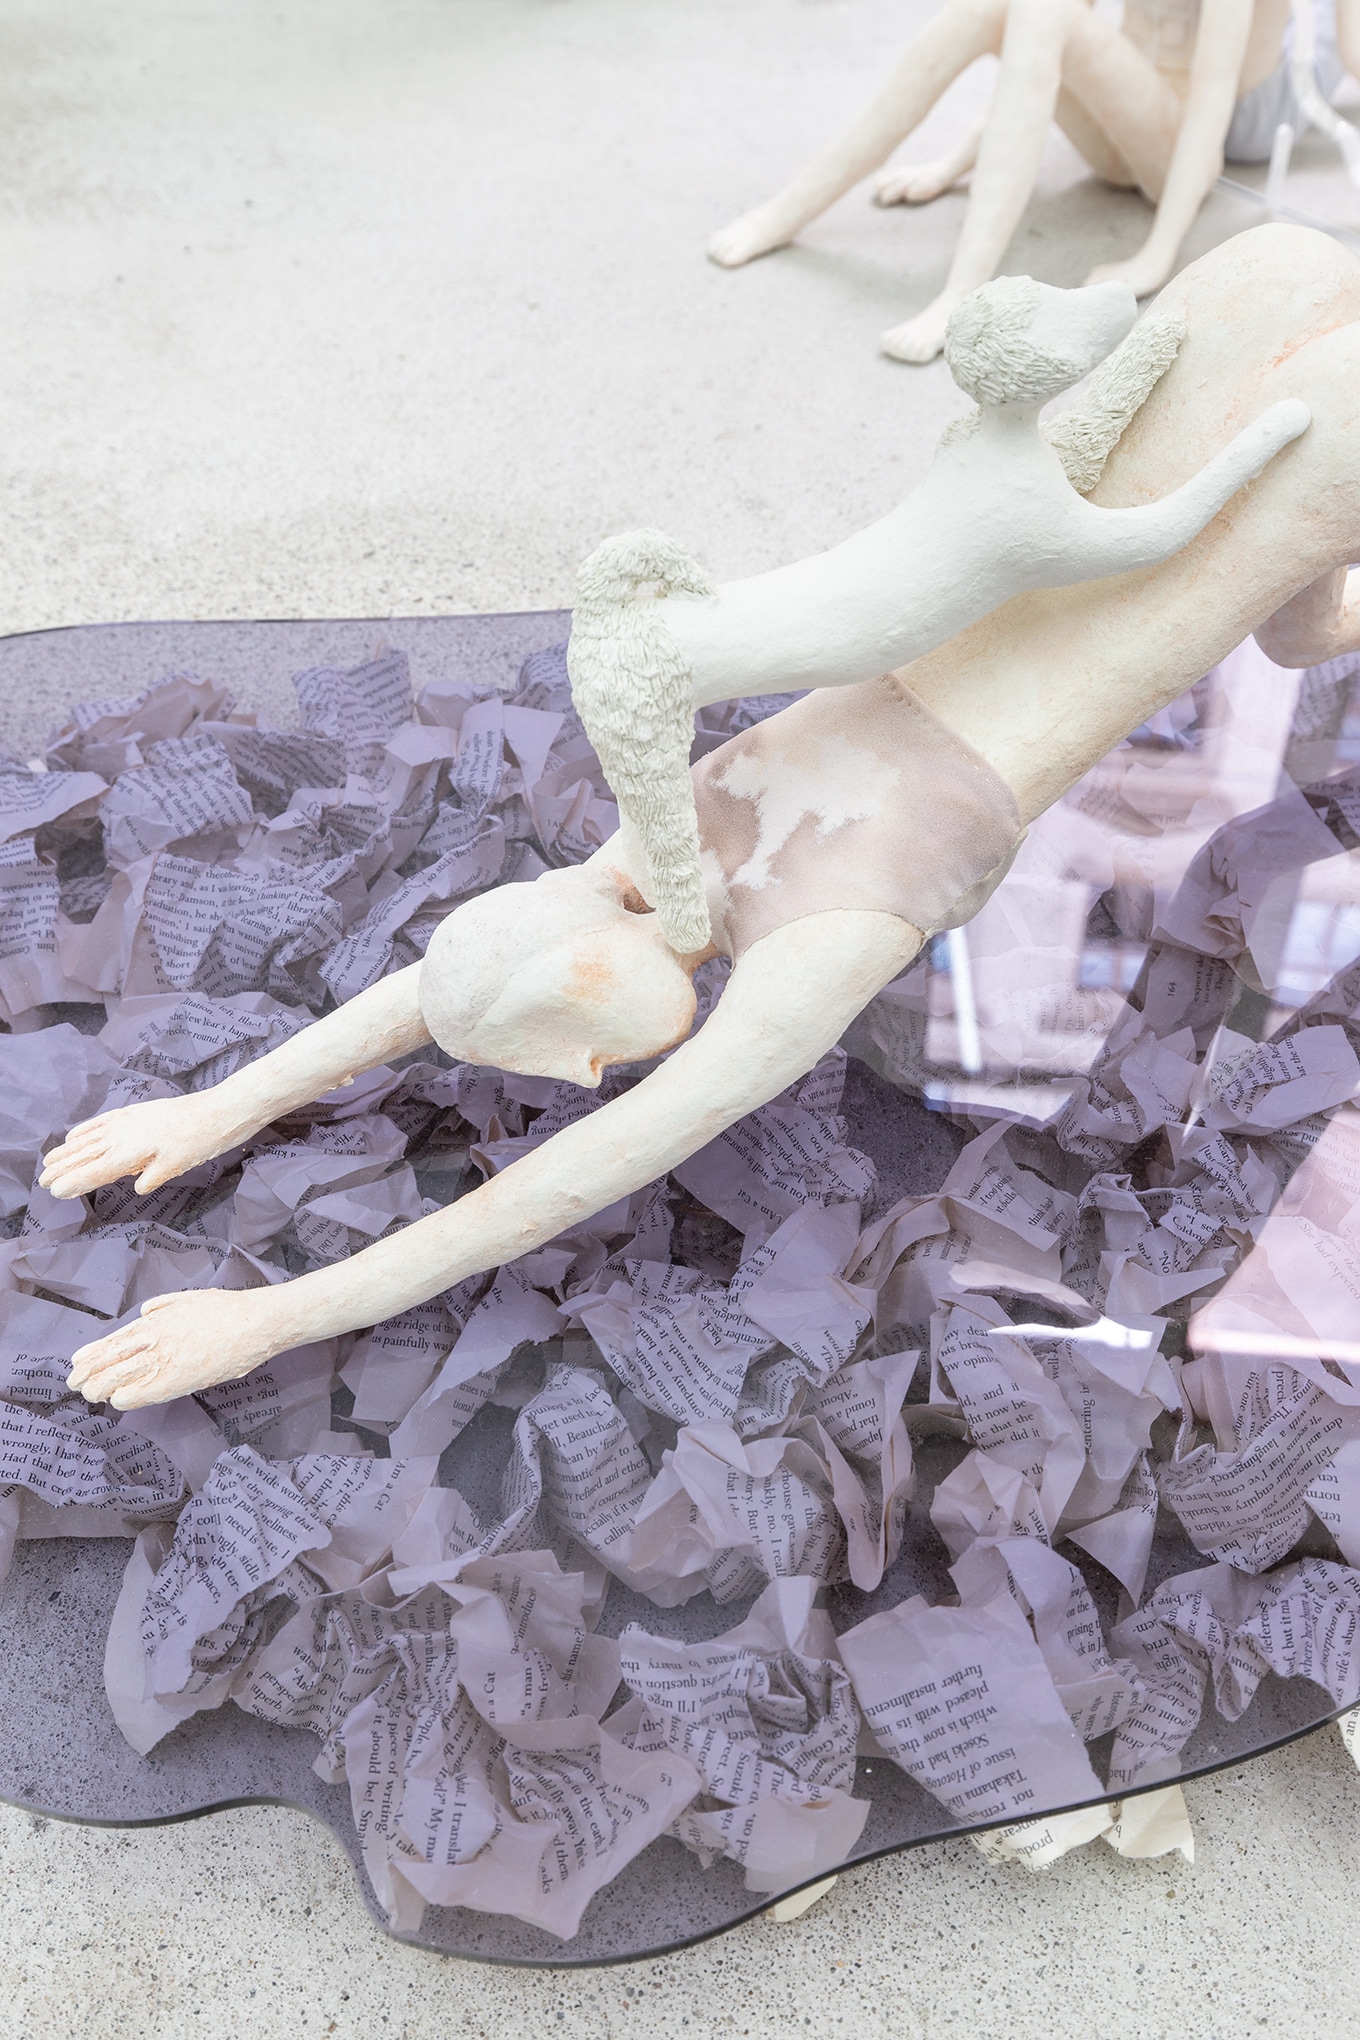 Chiara Bals & Jumpei Shimada, guided by the will to forget (detail), 2021